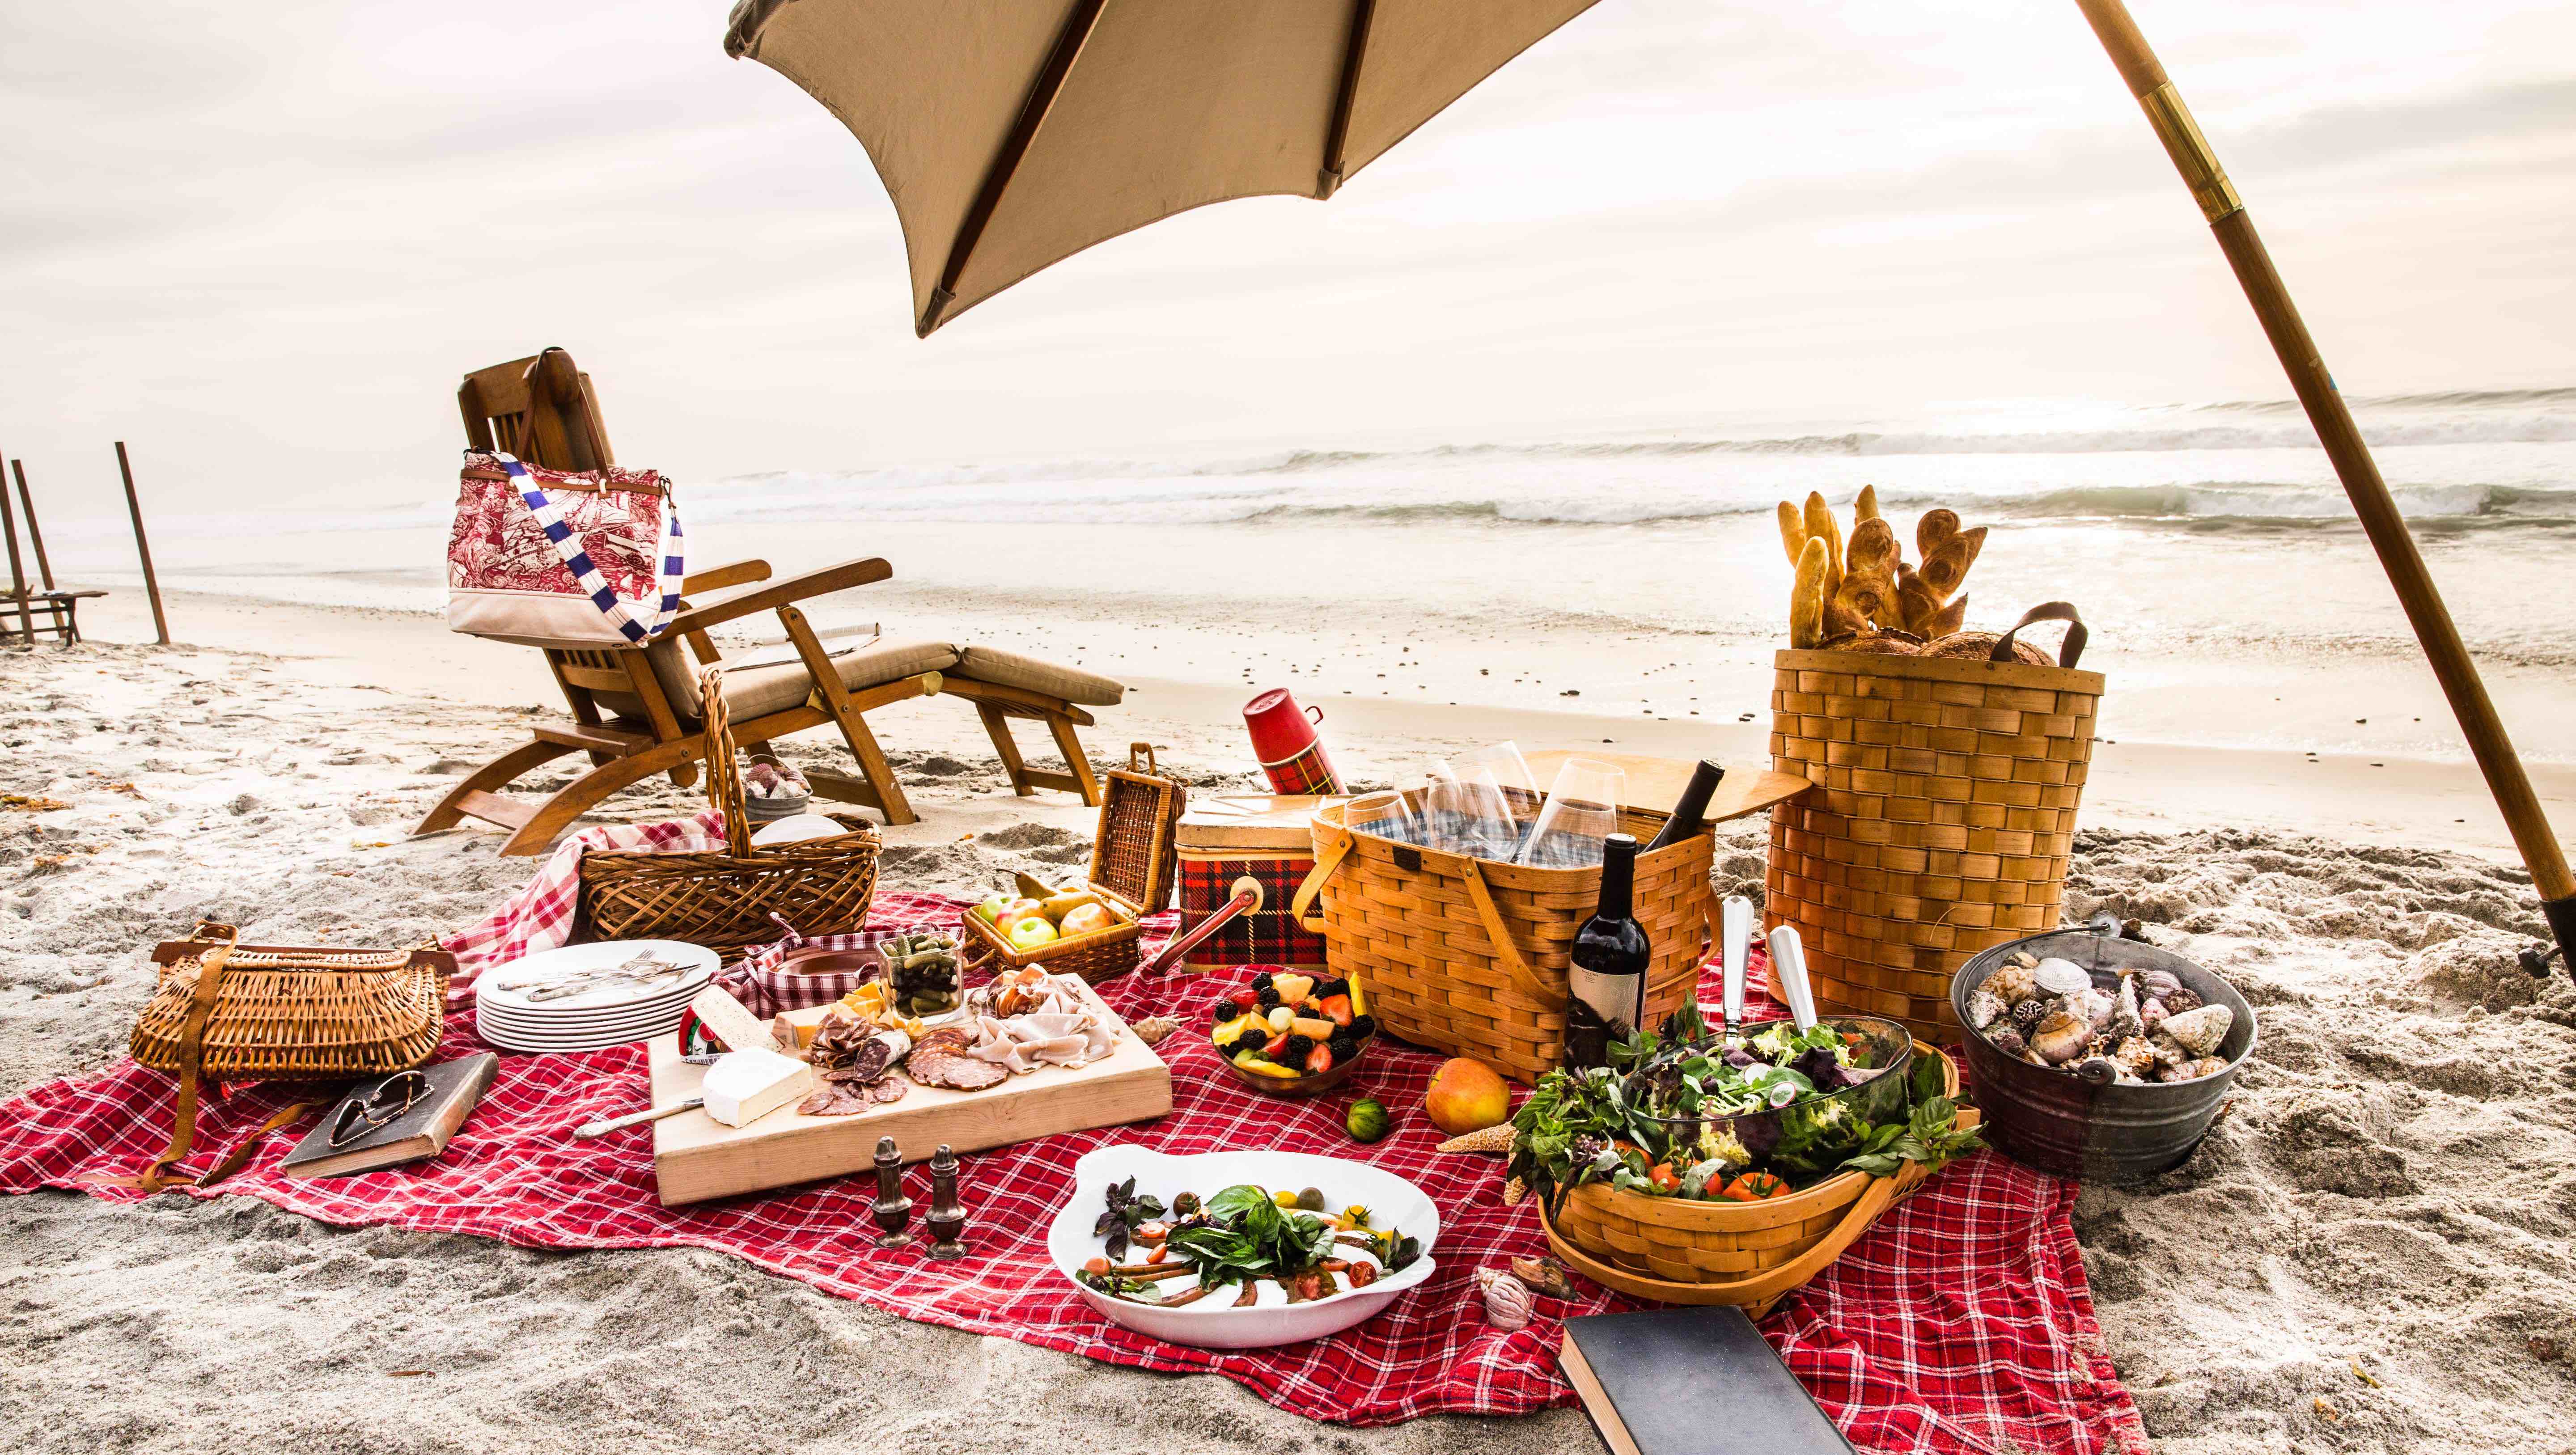 What to do at the beach if you don't like it faviana make a picnic